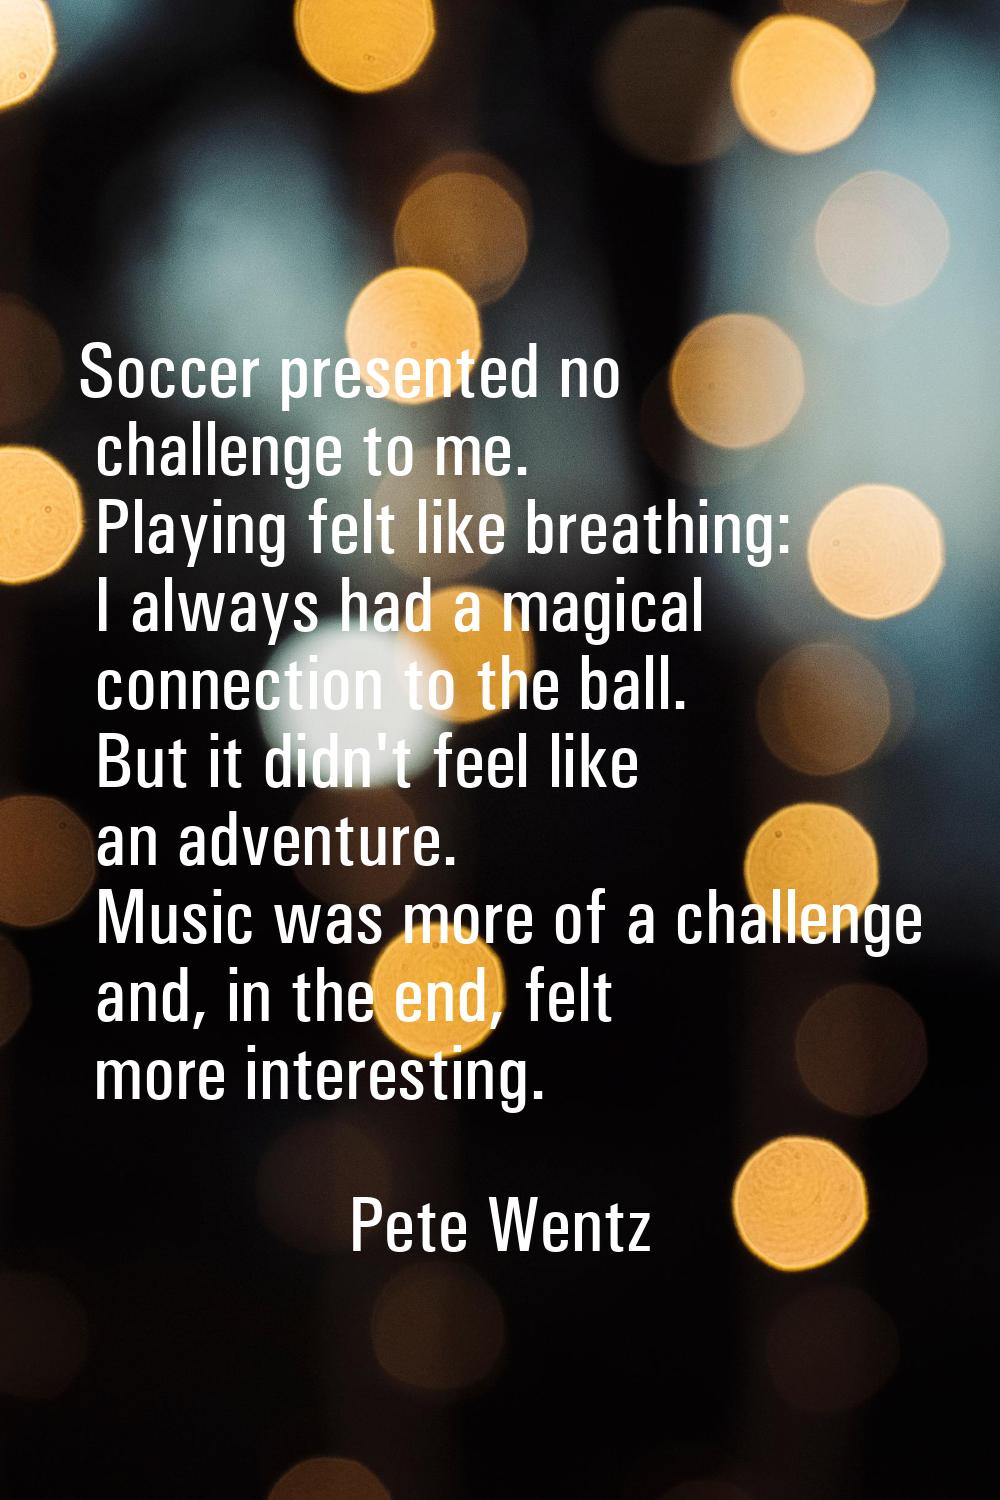 Soccer presented no challenge to me. Playing felt like breathing: I always had a magical connection